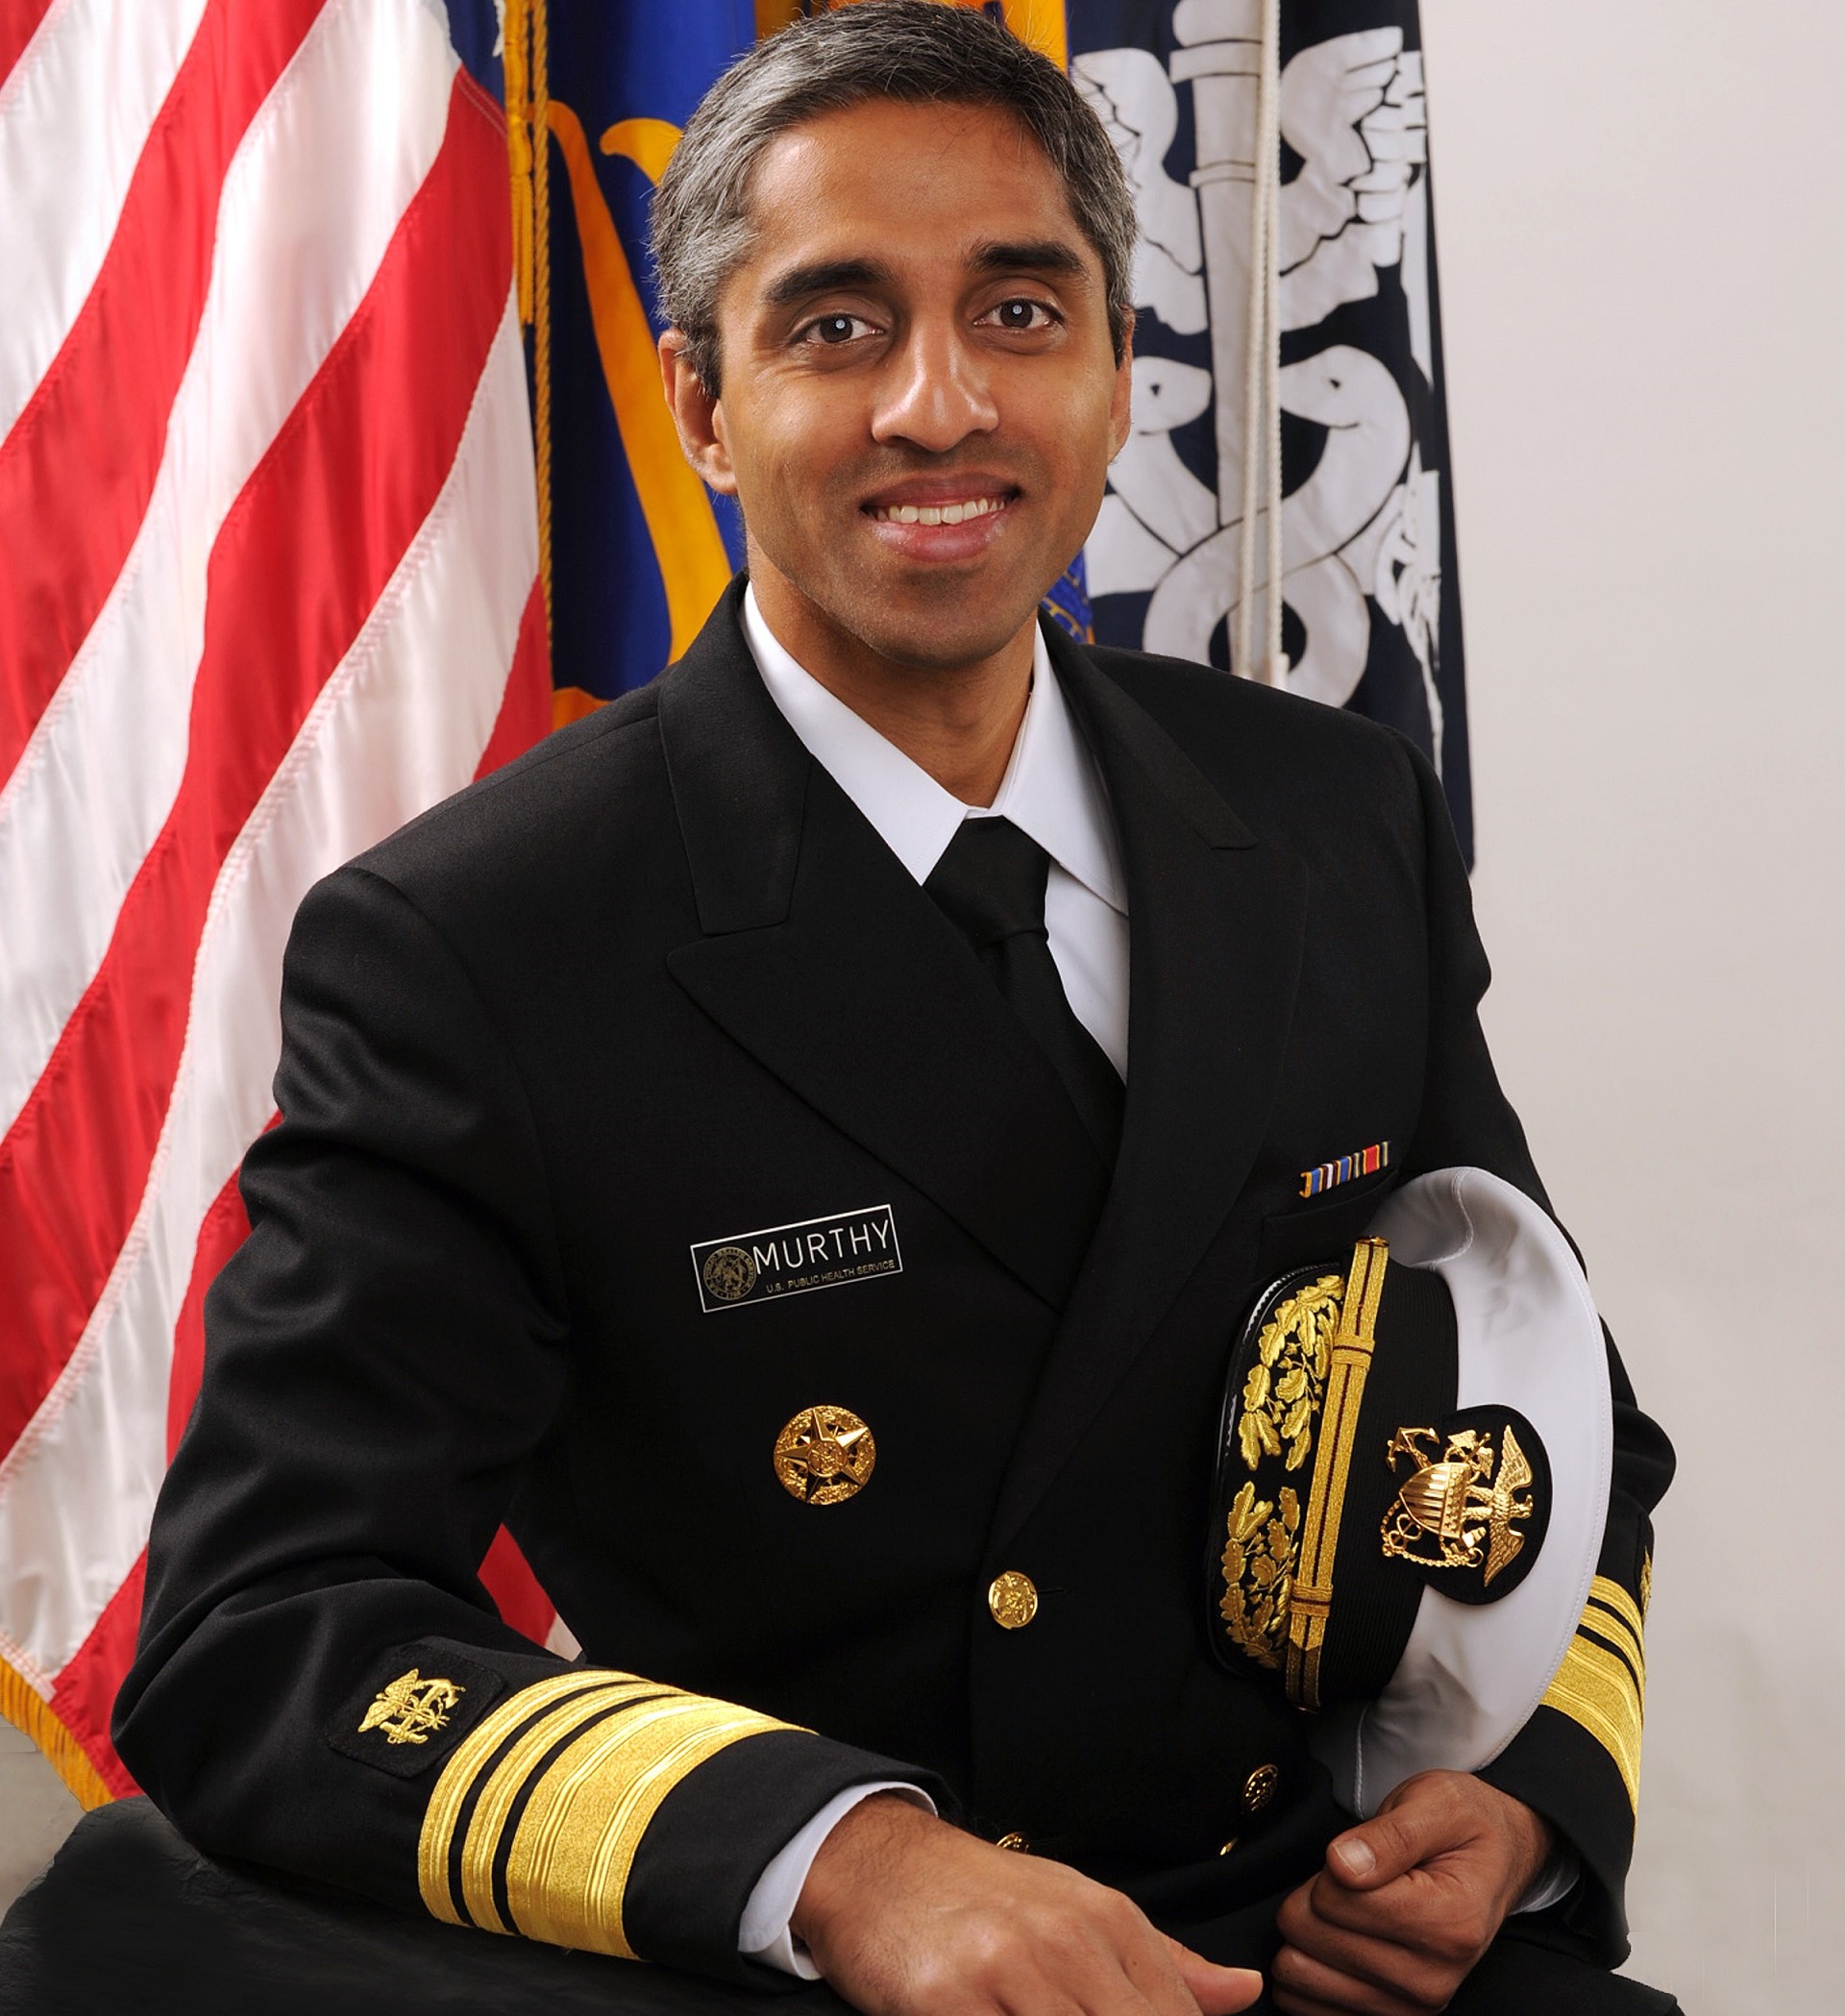 The Surrealist Surgeon General and Public Health